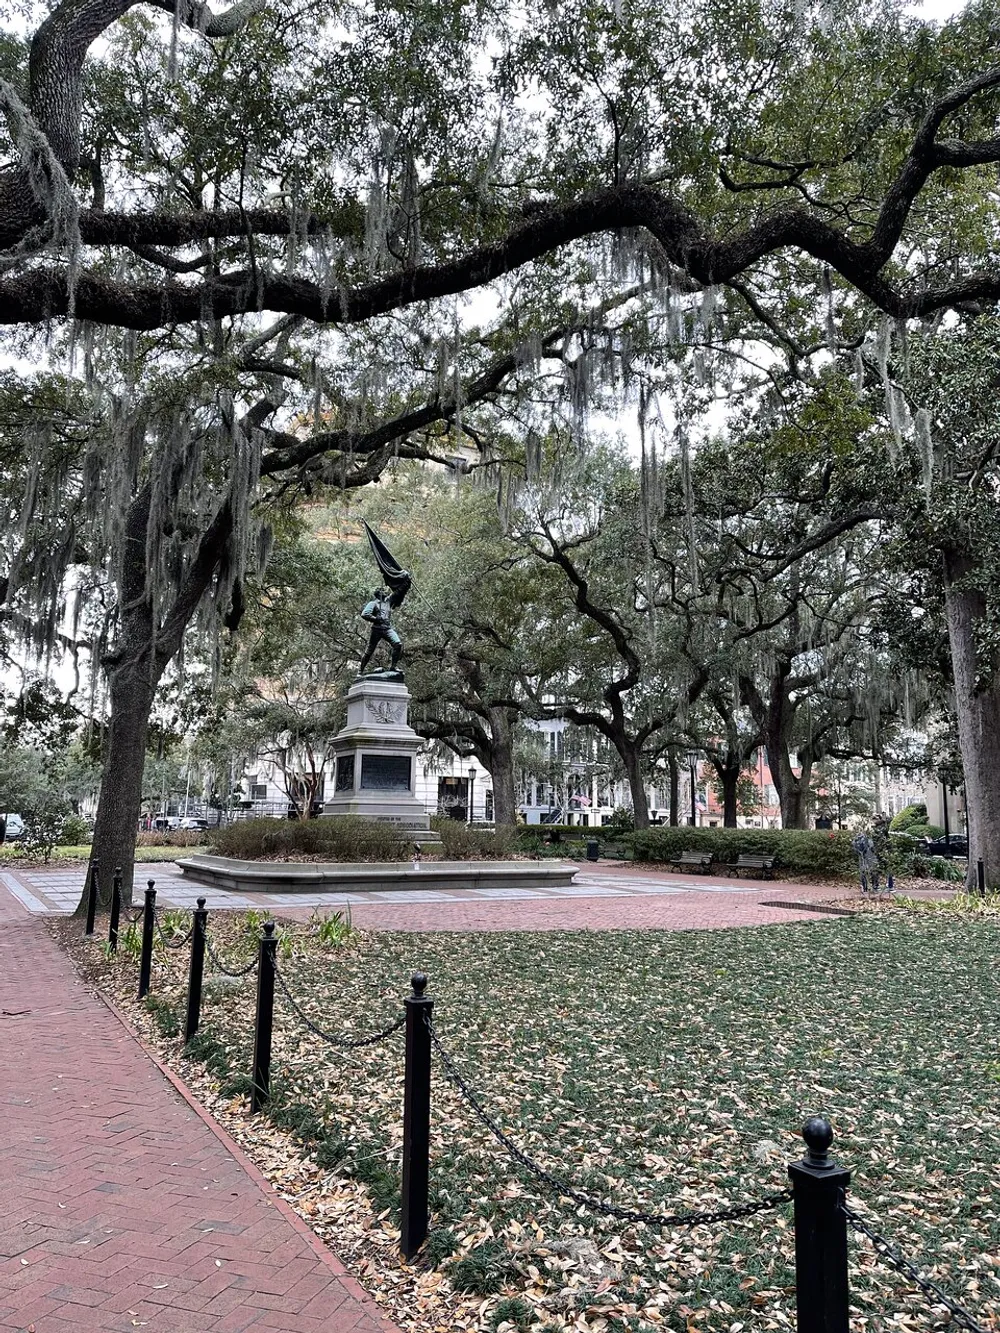 An autumnal park scene featuring a statue atop a pedestal surrounded by leaf-strewn grass live oak trees draped with Spanish moss and a brick pathway